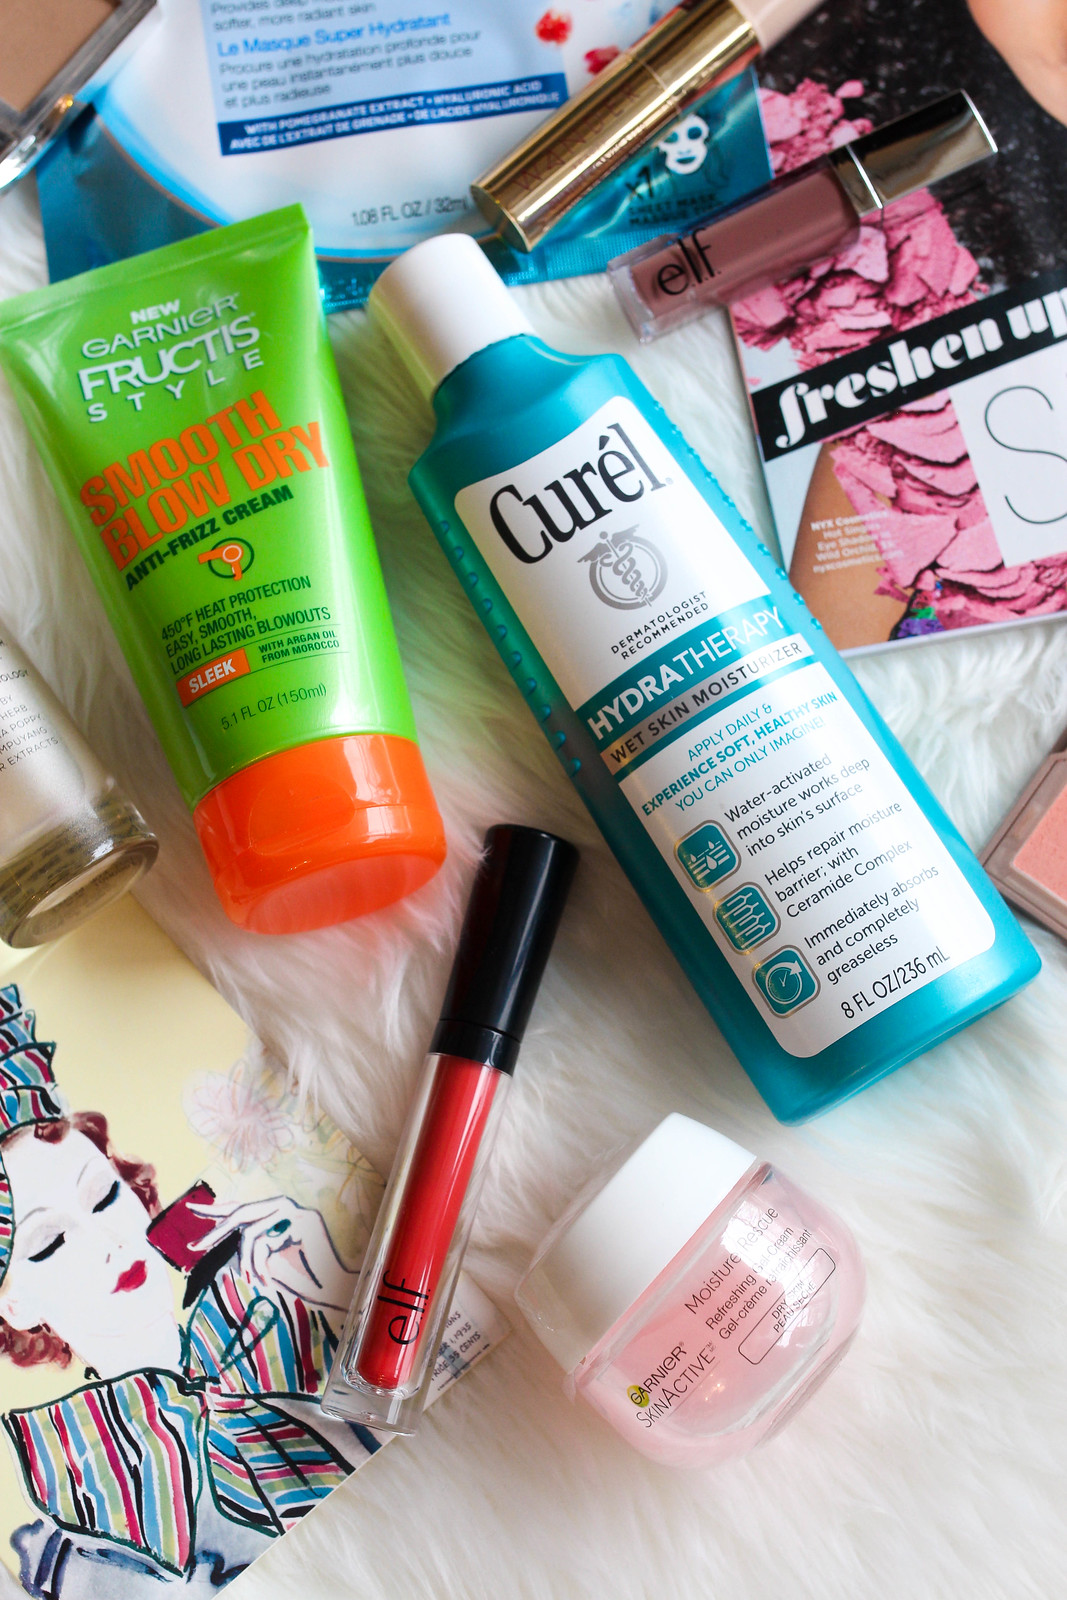 Curel Hydratherapy Wet Skin Moisturizer, e.l.f. Tinted Lip Oil and Ganier SkinActive Moisture Rescue Refreshing Gel Cream Review